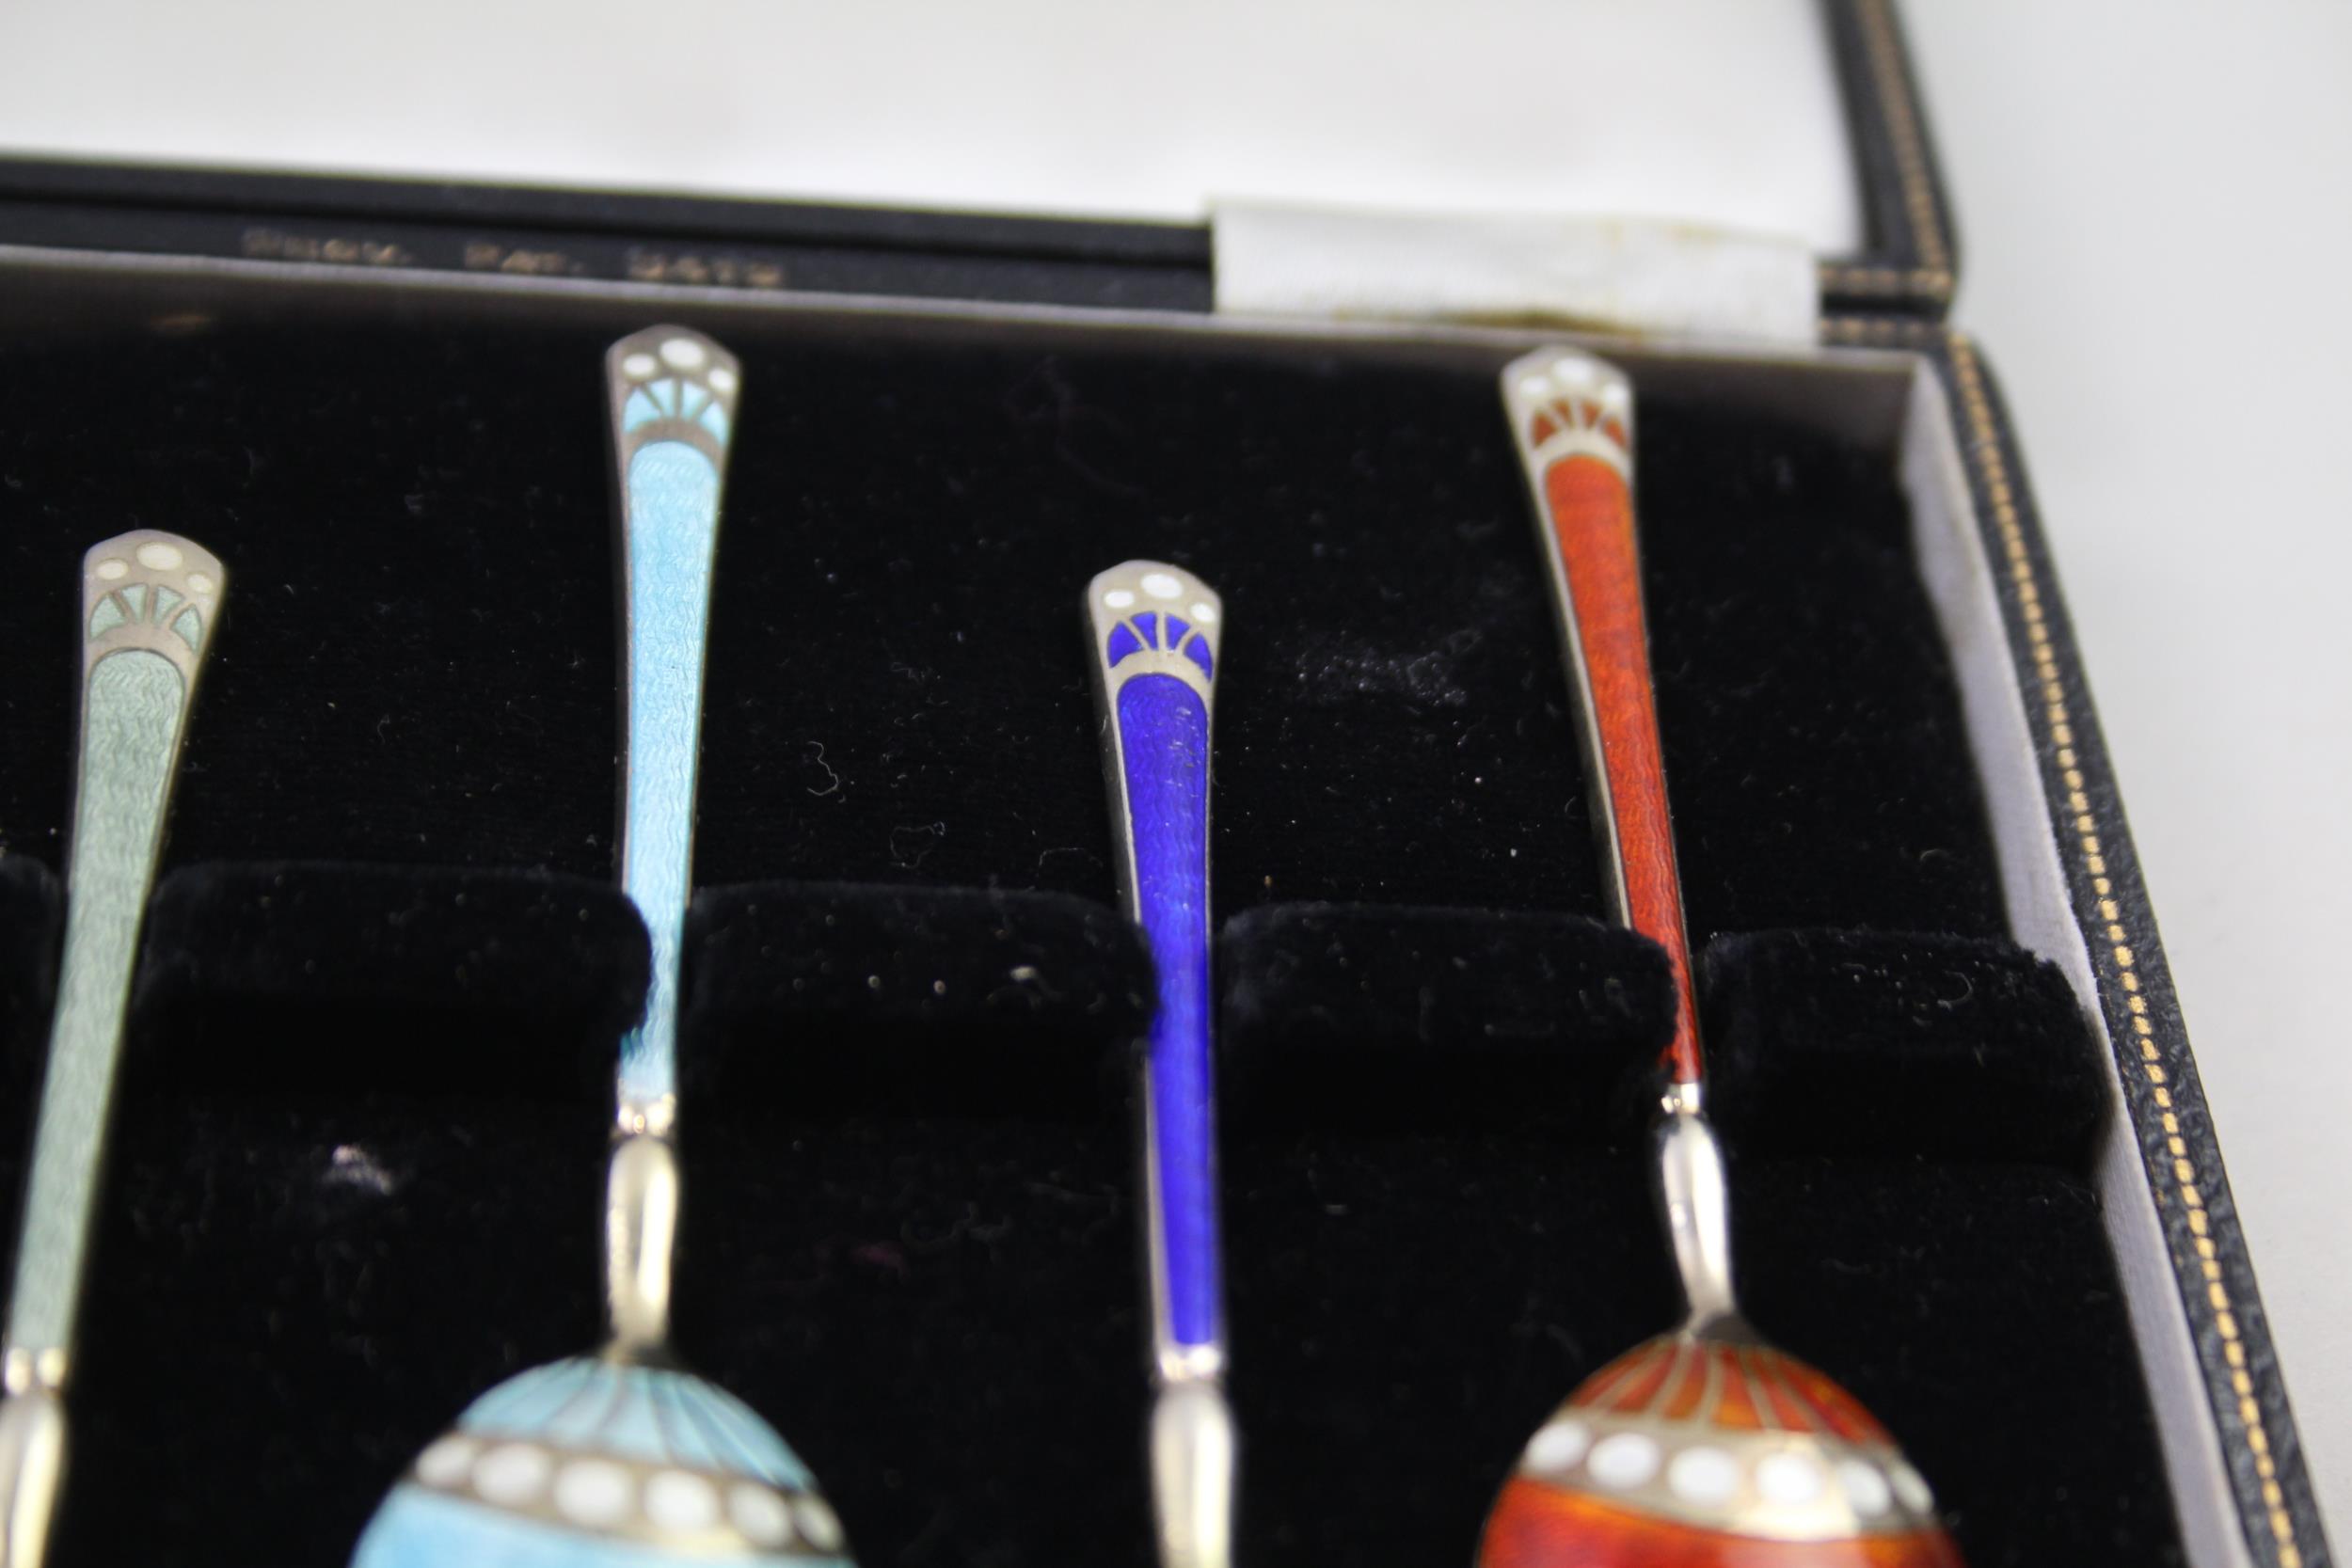 6 x Vintage 1956 Birmingham Sterling Silver Guilloche Enamel Spoons (69g) // w/ Fitted Case - Image 5 of 5